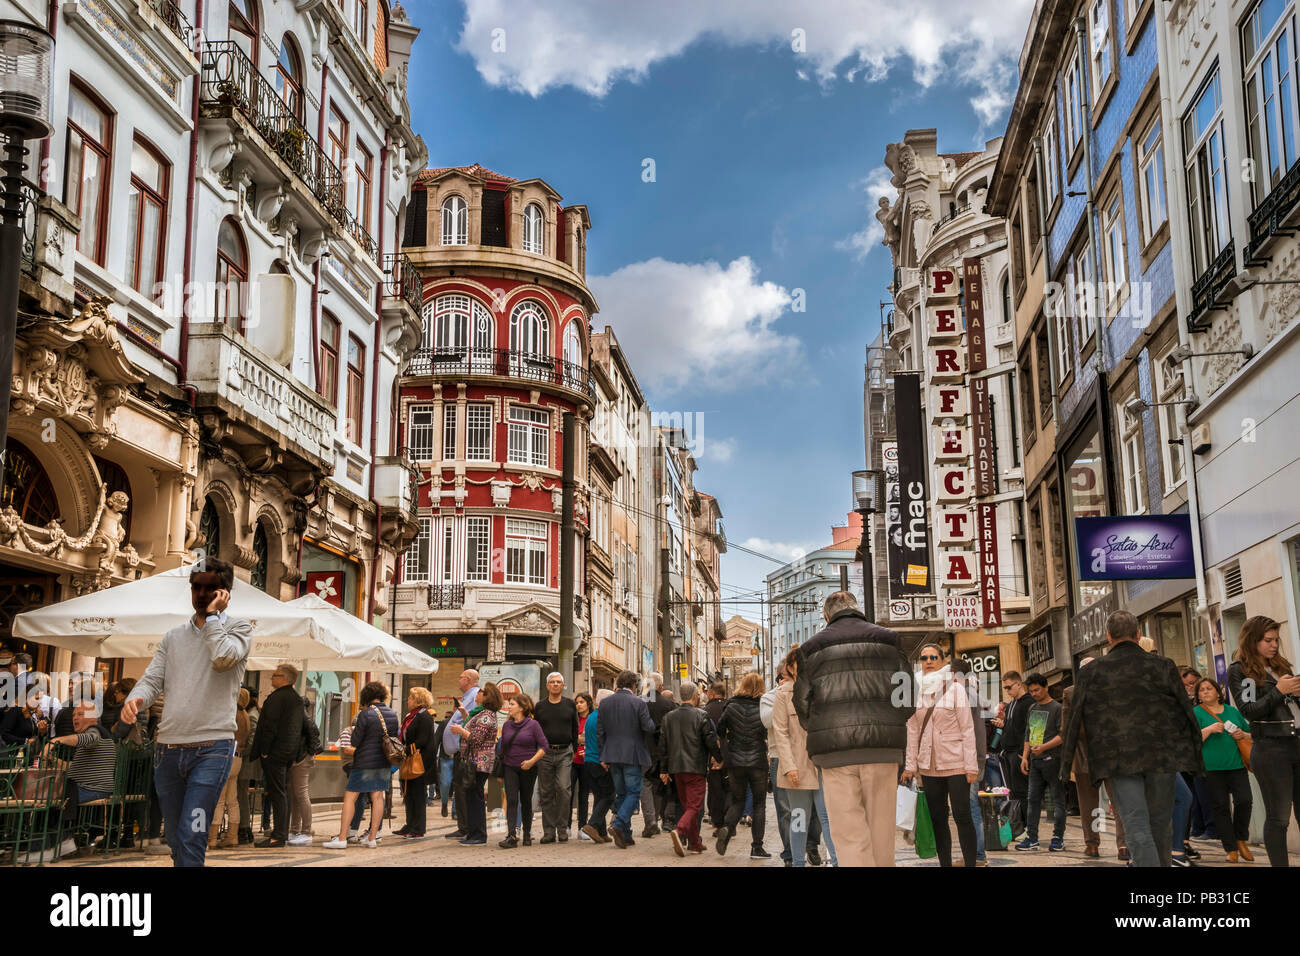 View along the 1.5km  Rua Santa Catarina with people waiting in line queueing to enter the Majestic Cafe and signs of the retail atores in plain view. Stock Photo